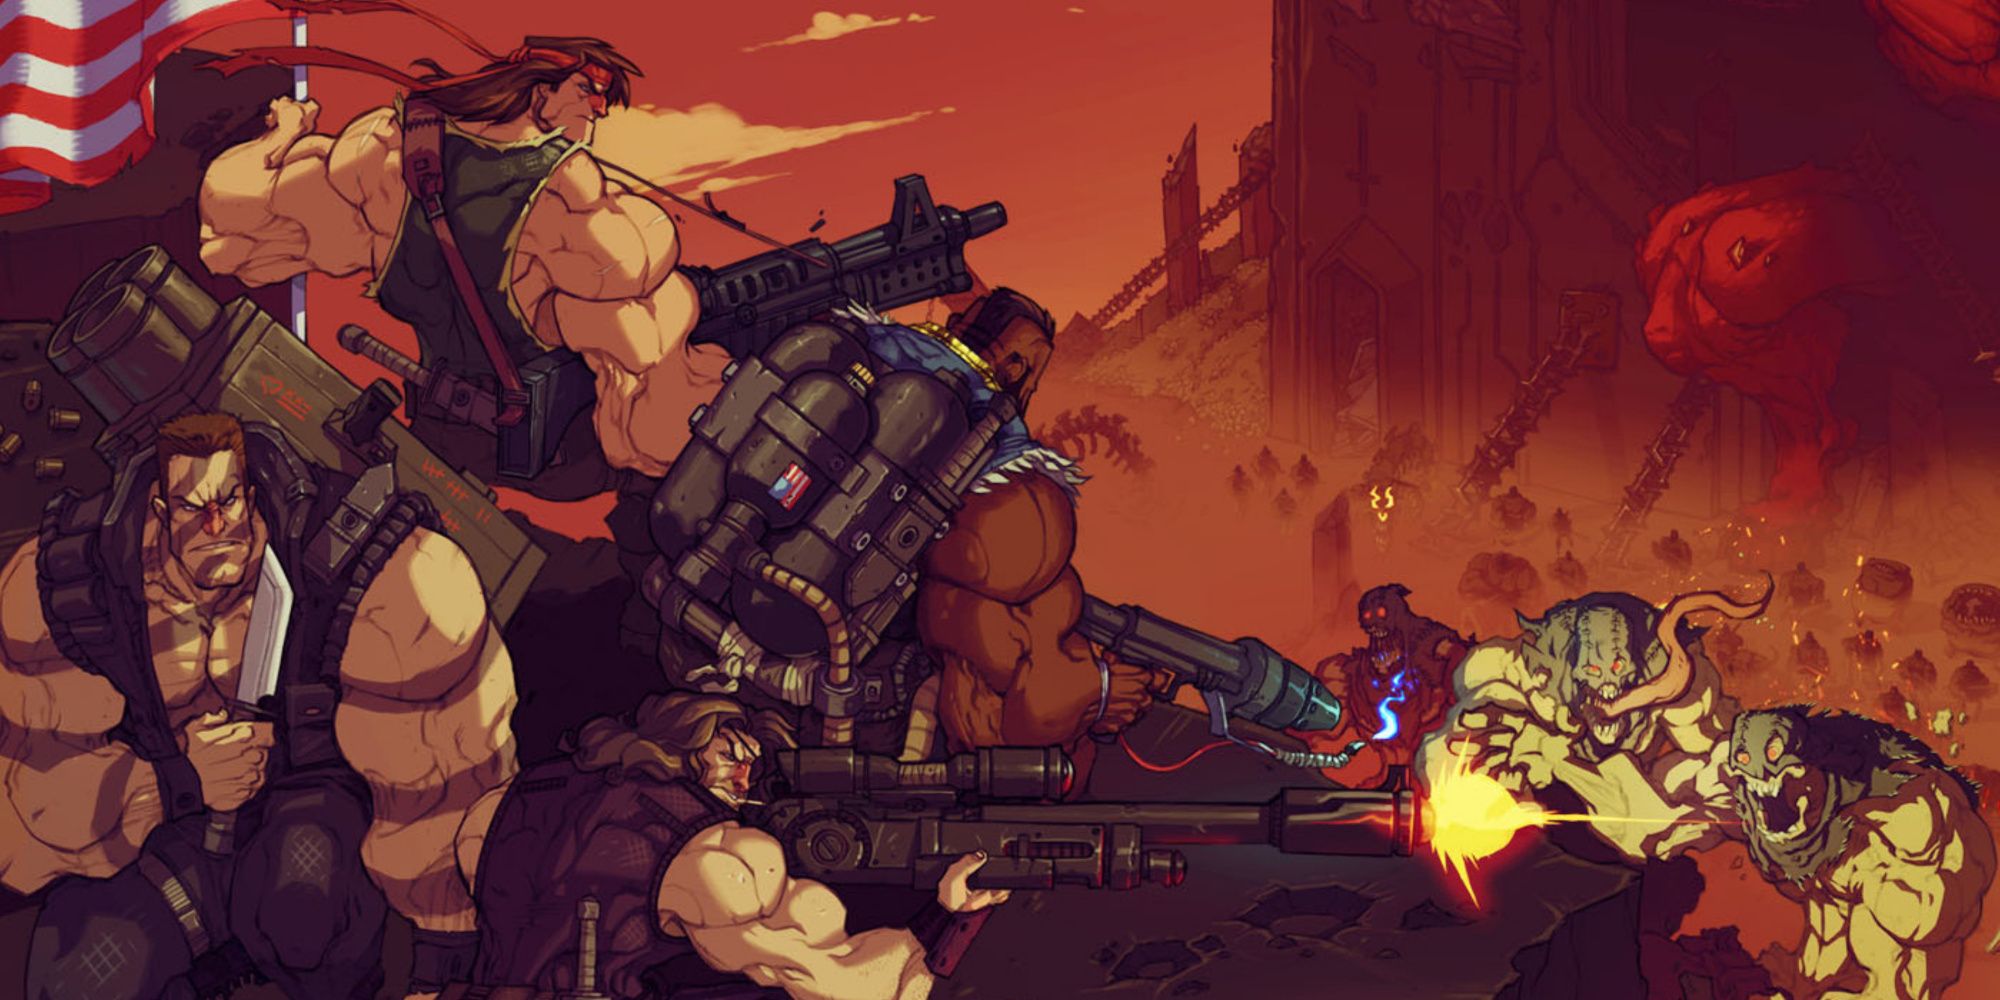 Promotional art featuring Broforce characters